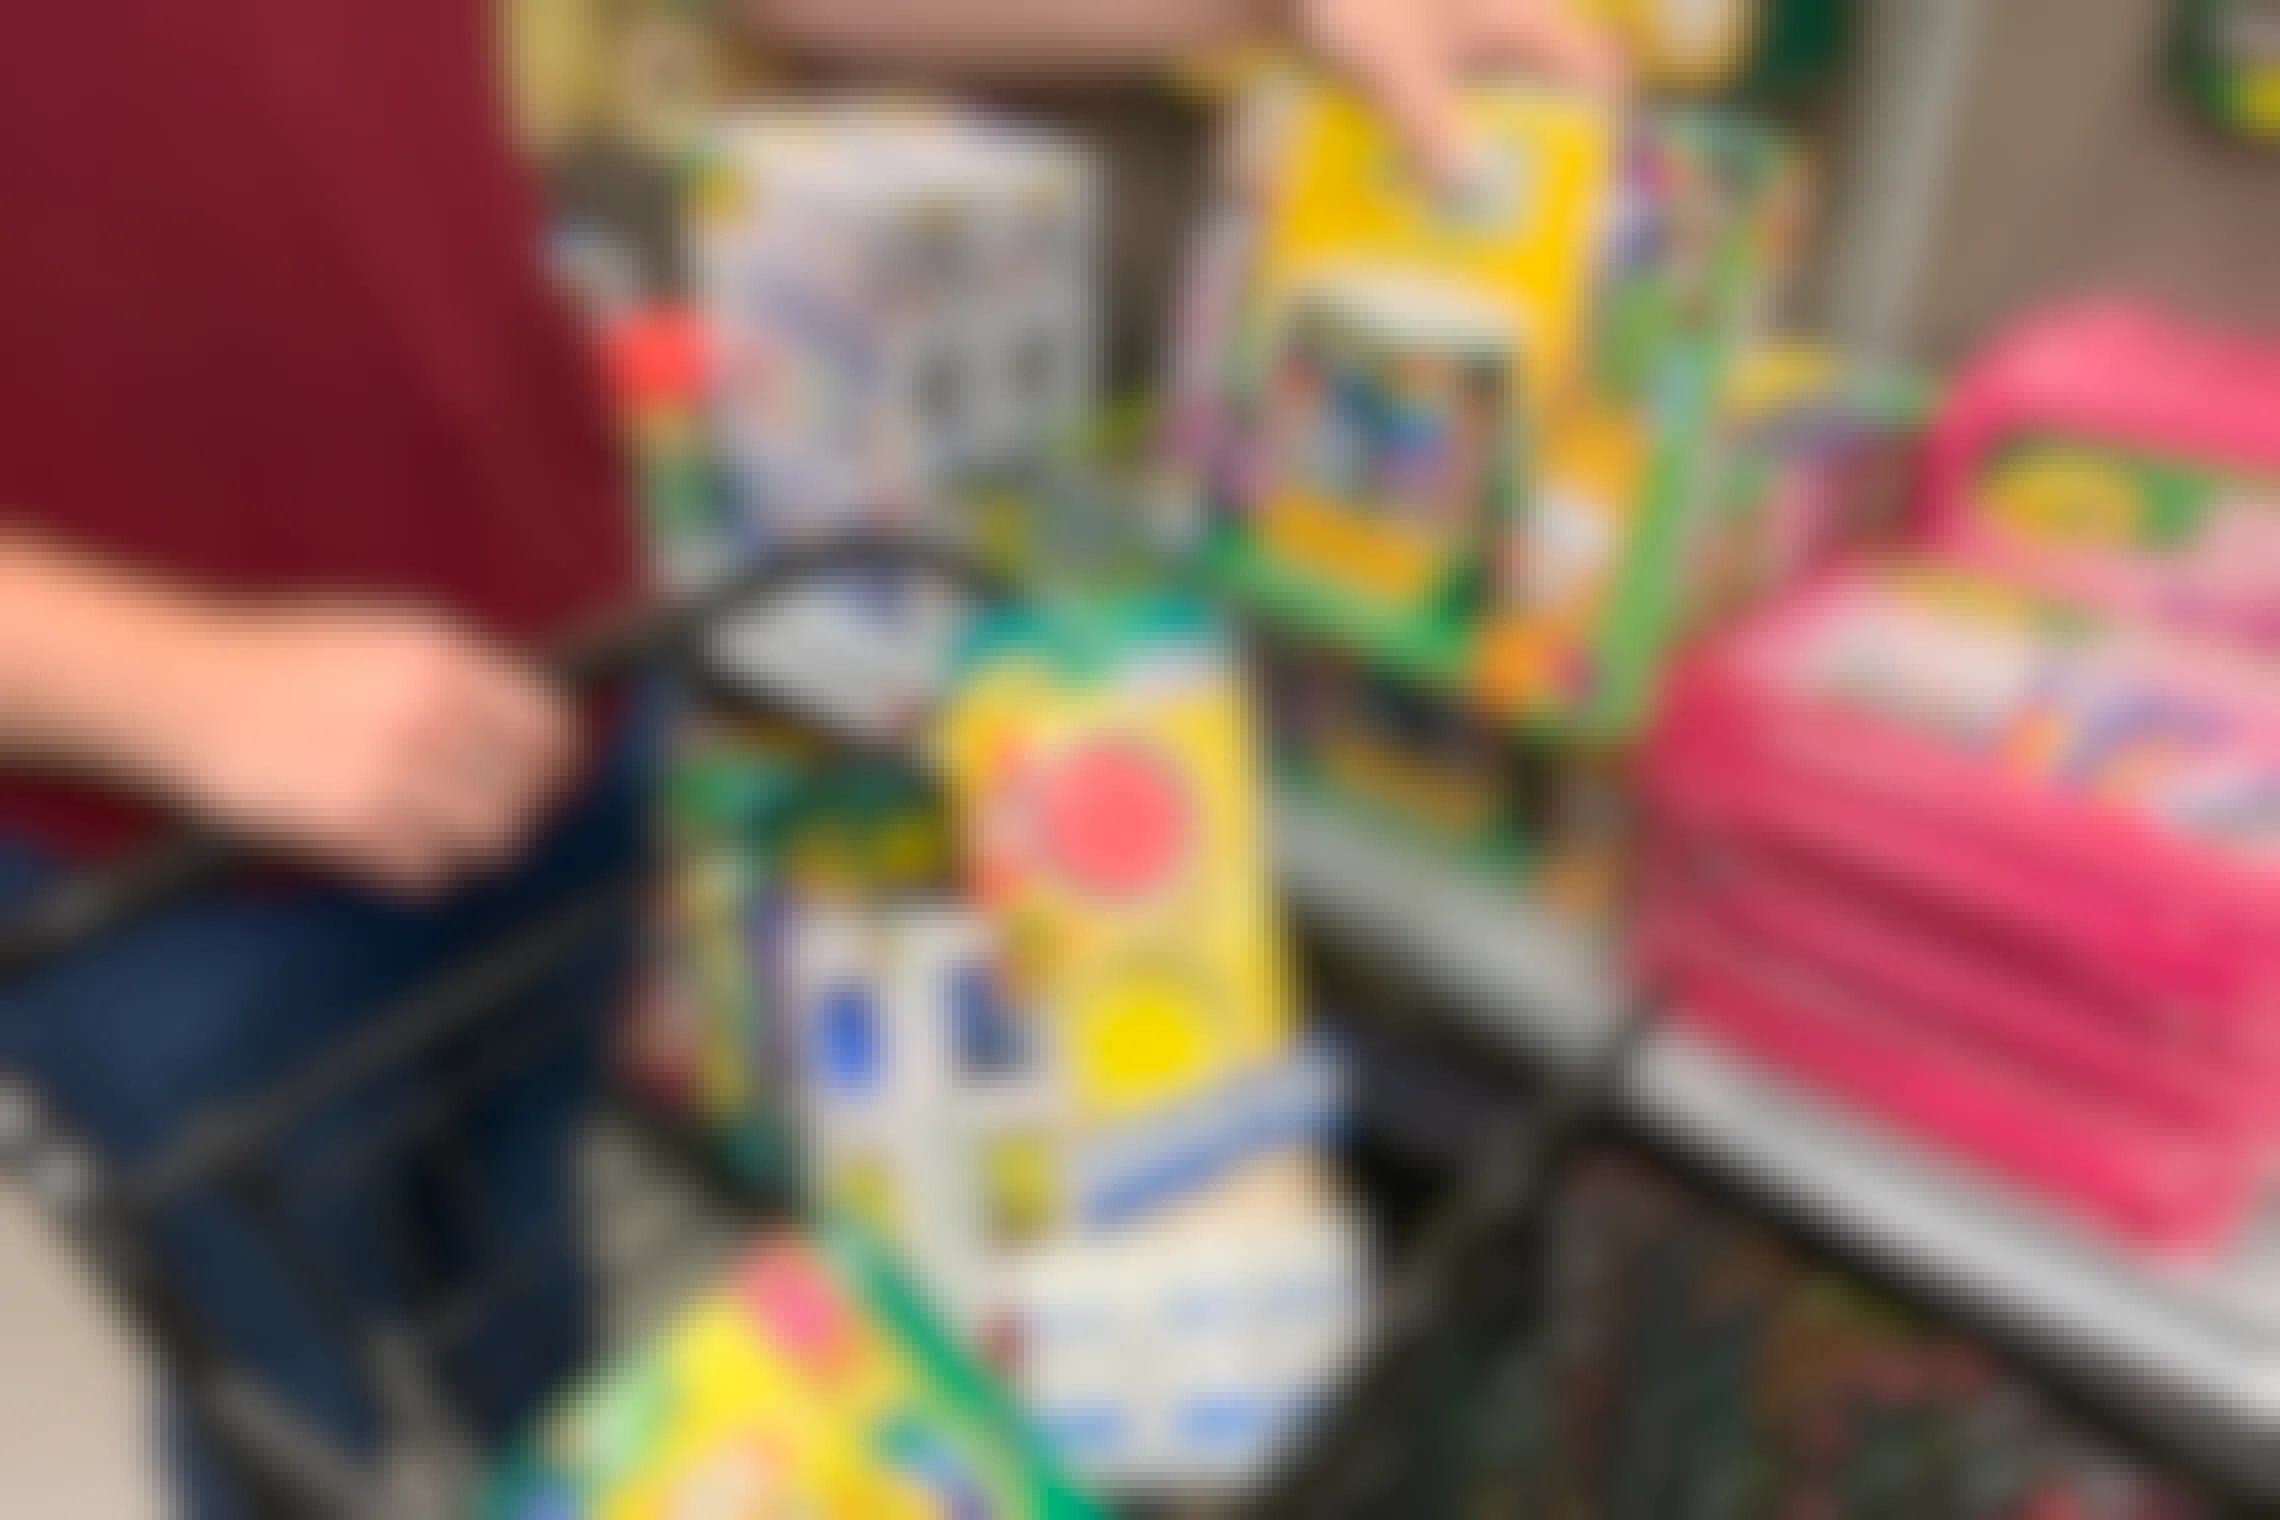 A person putting some school art supplies in a cart at Michaels.